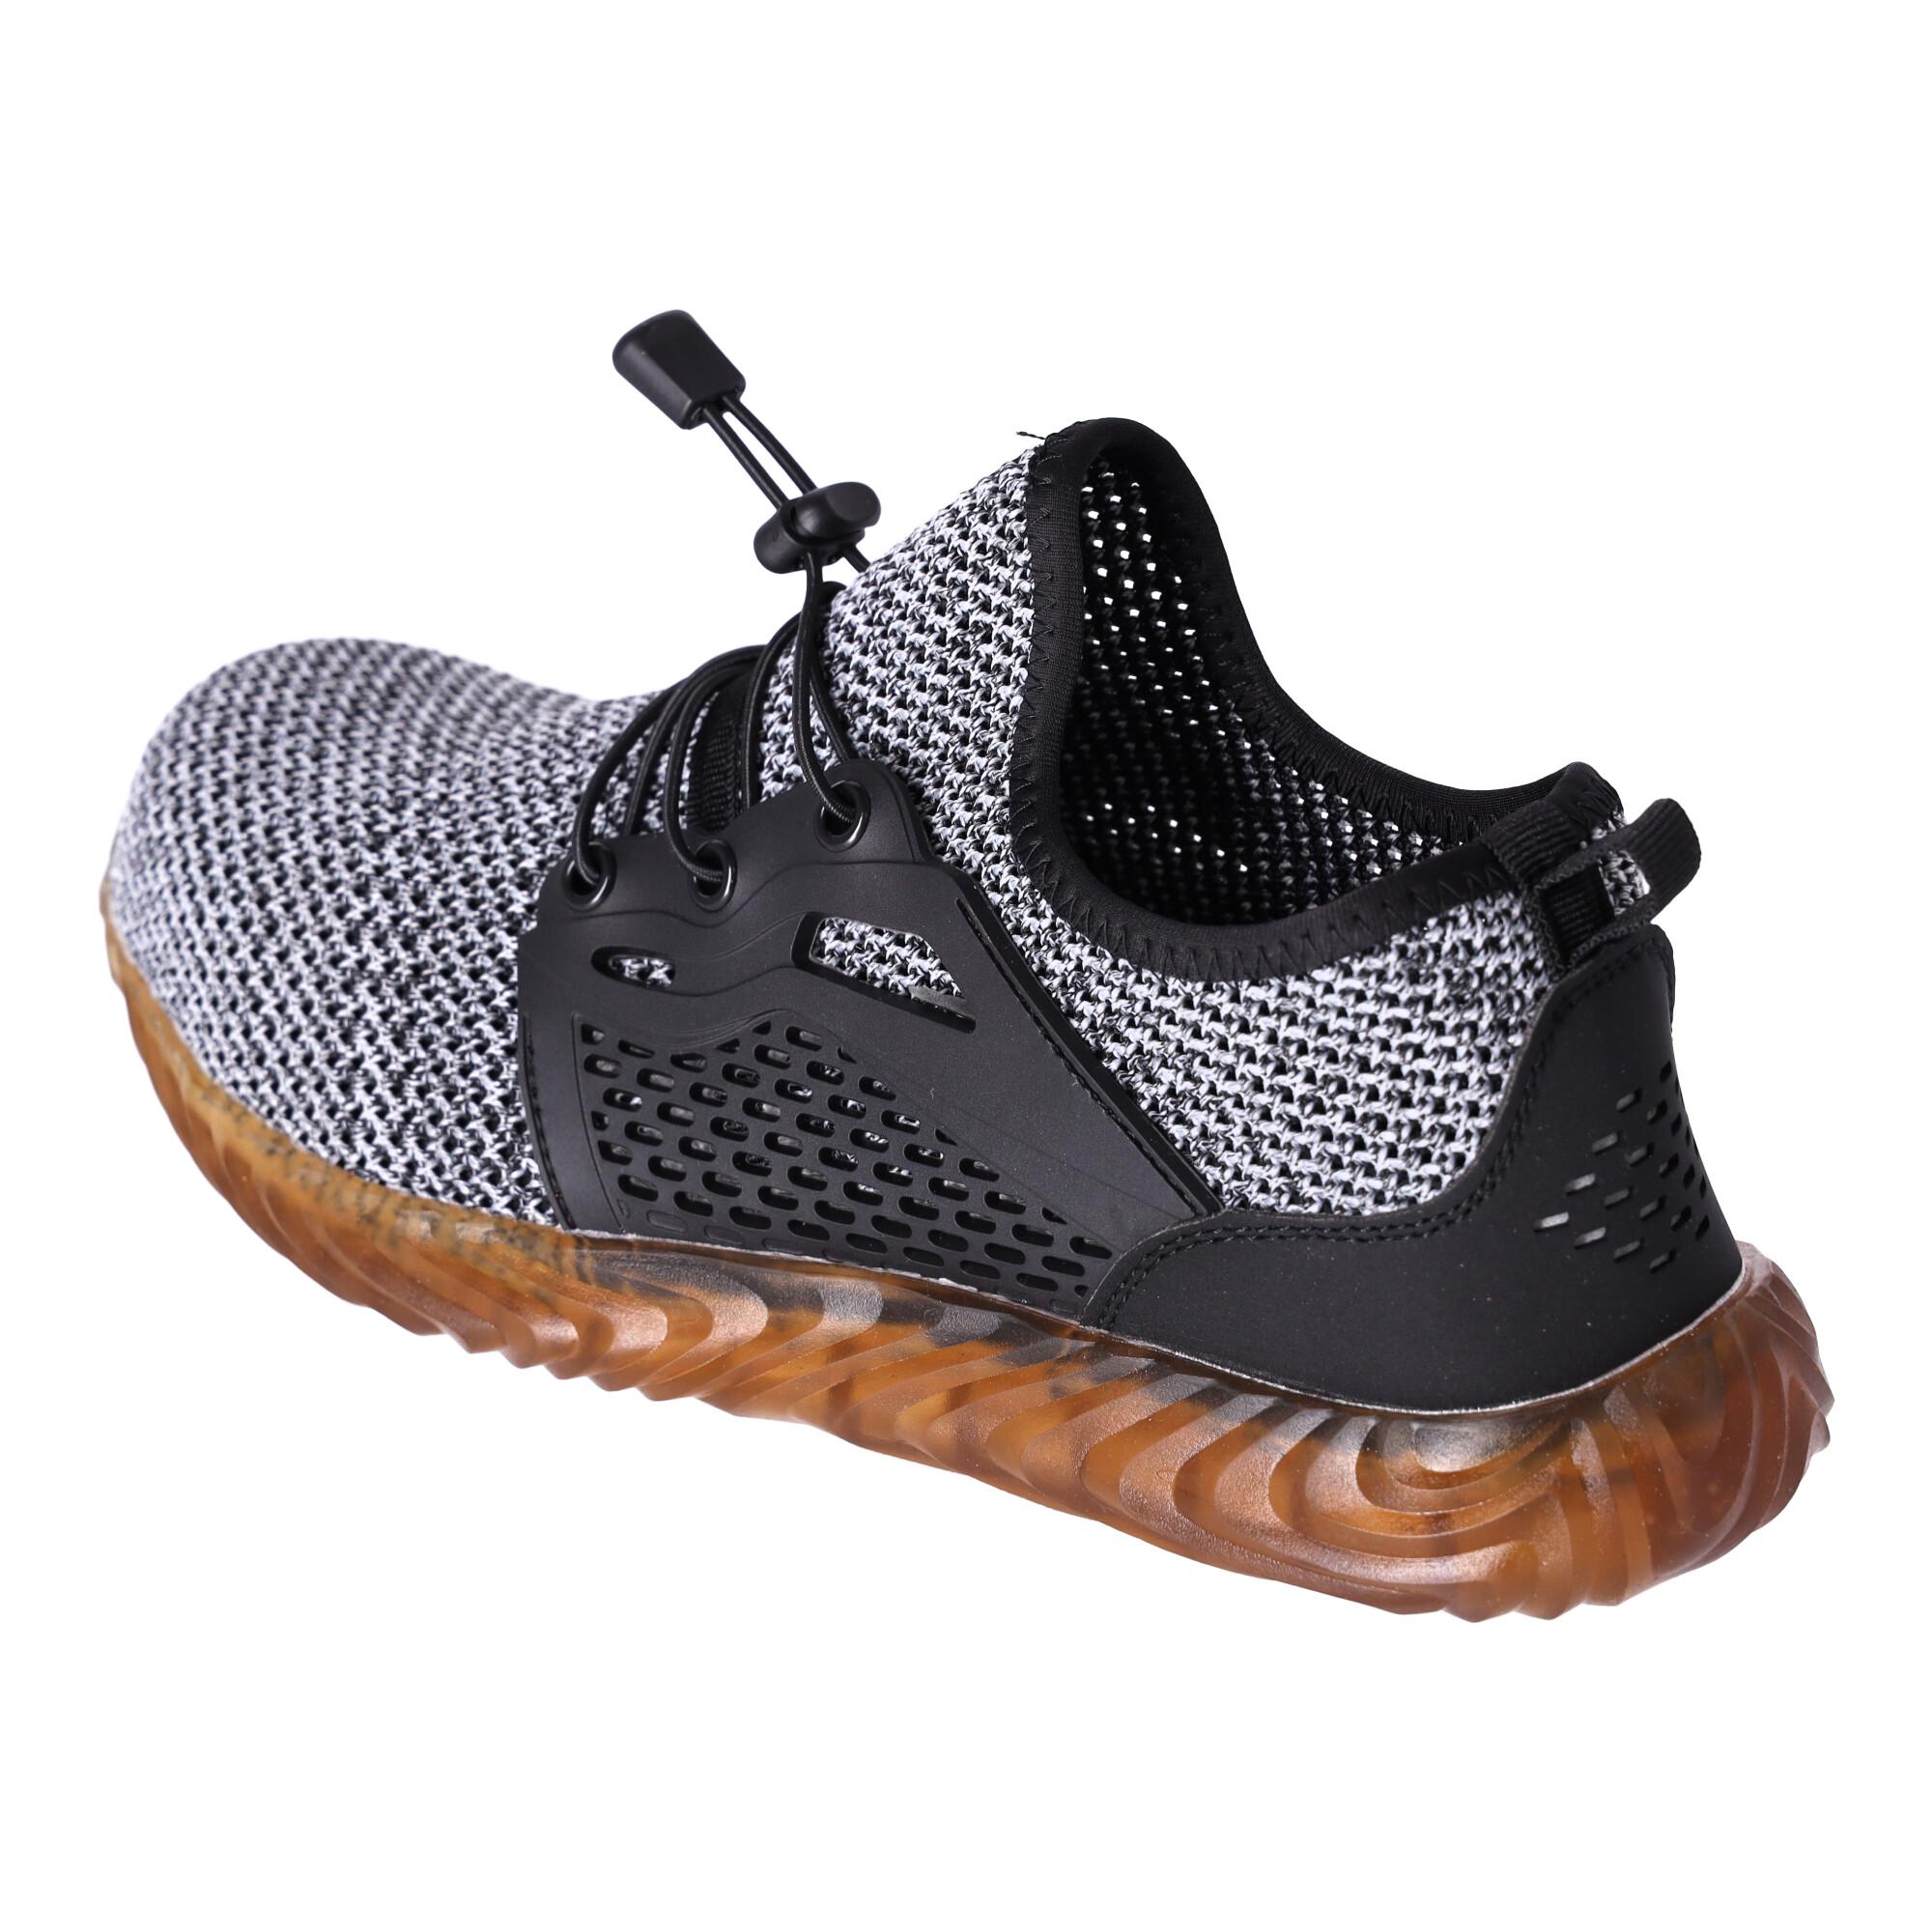 Work safety shoes Soft "43" - gray